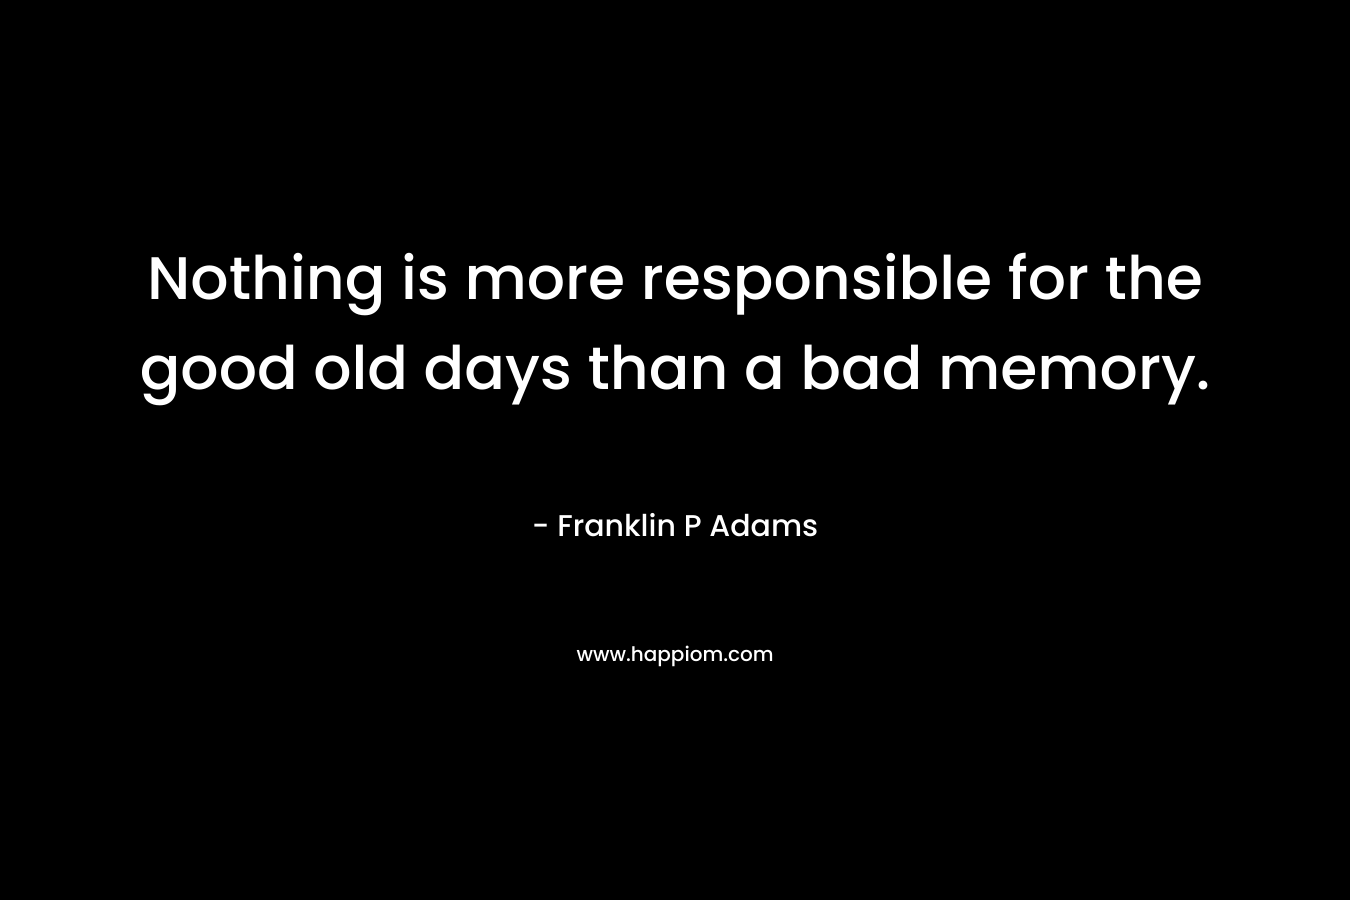 Nothing is more responsible for the good old days than a bad memory.